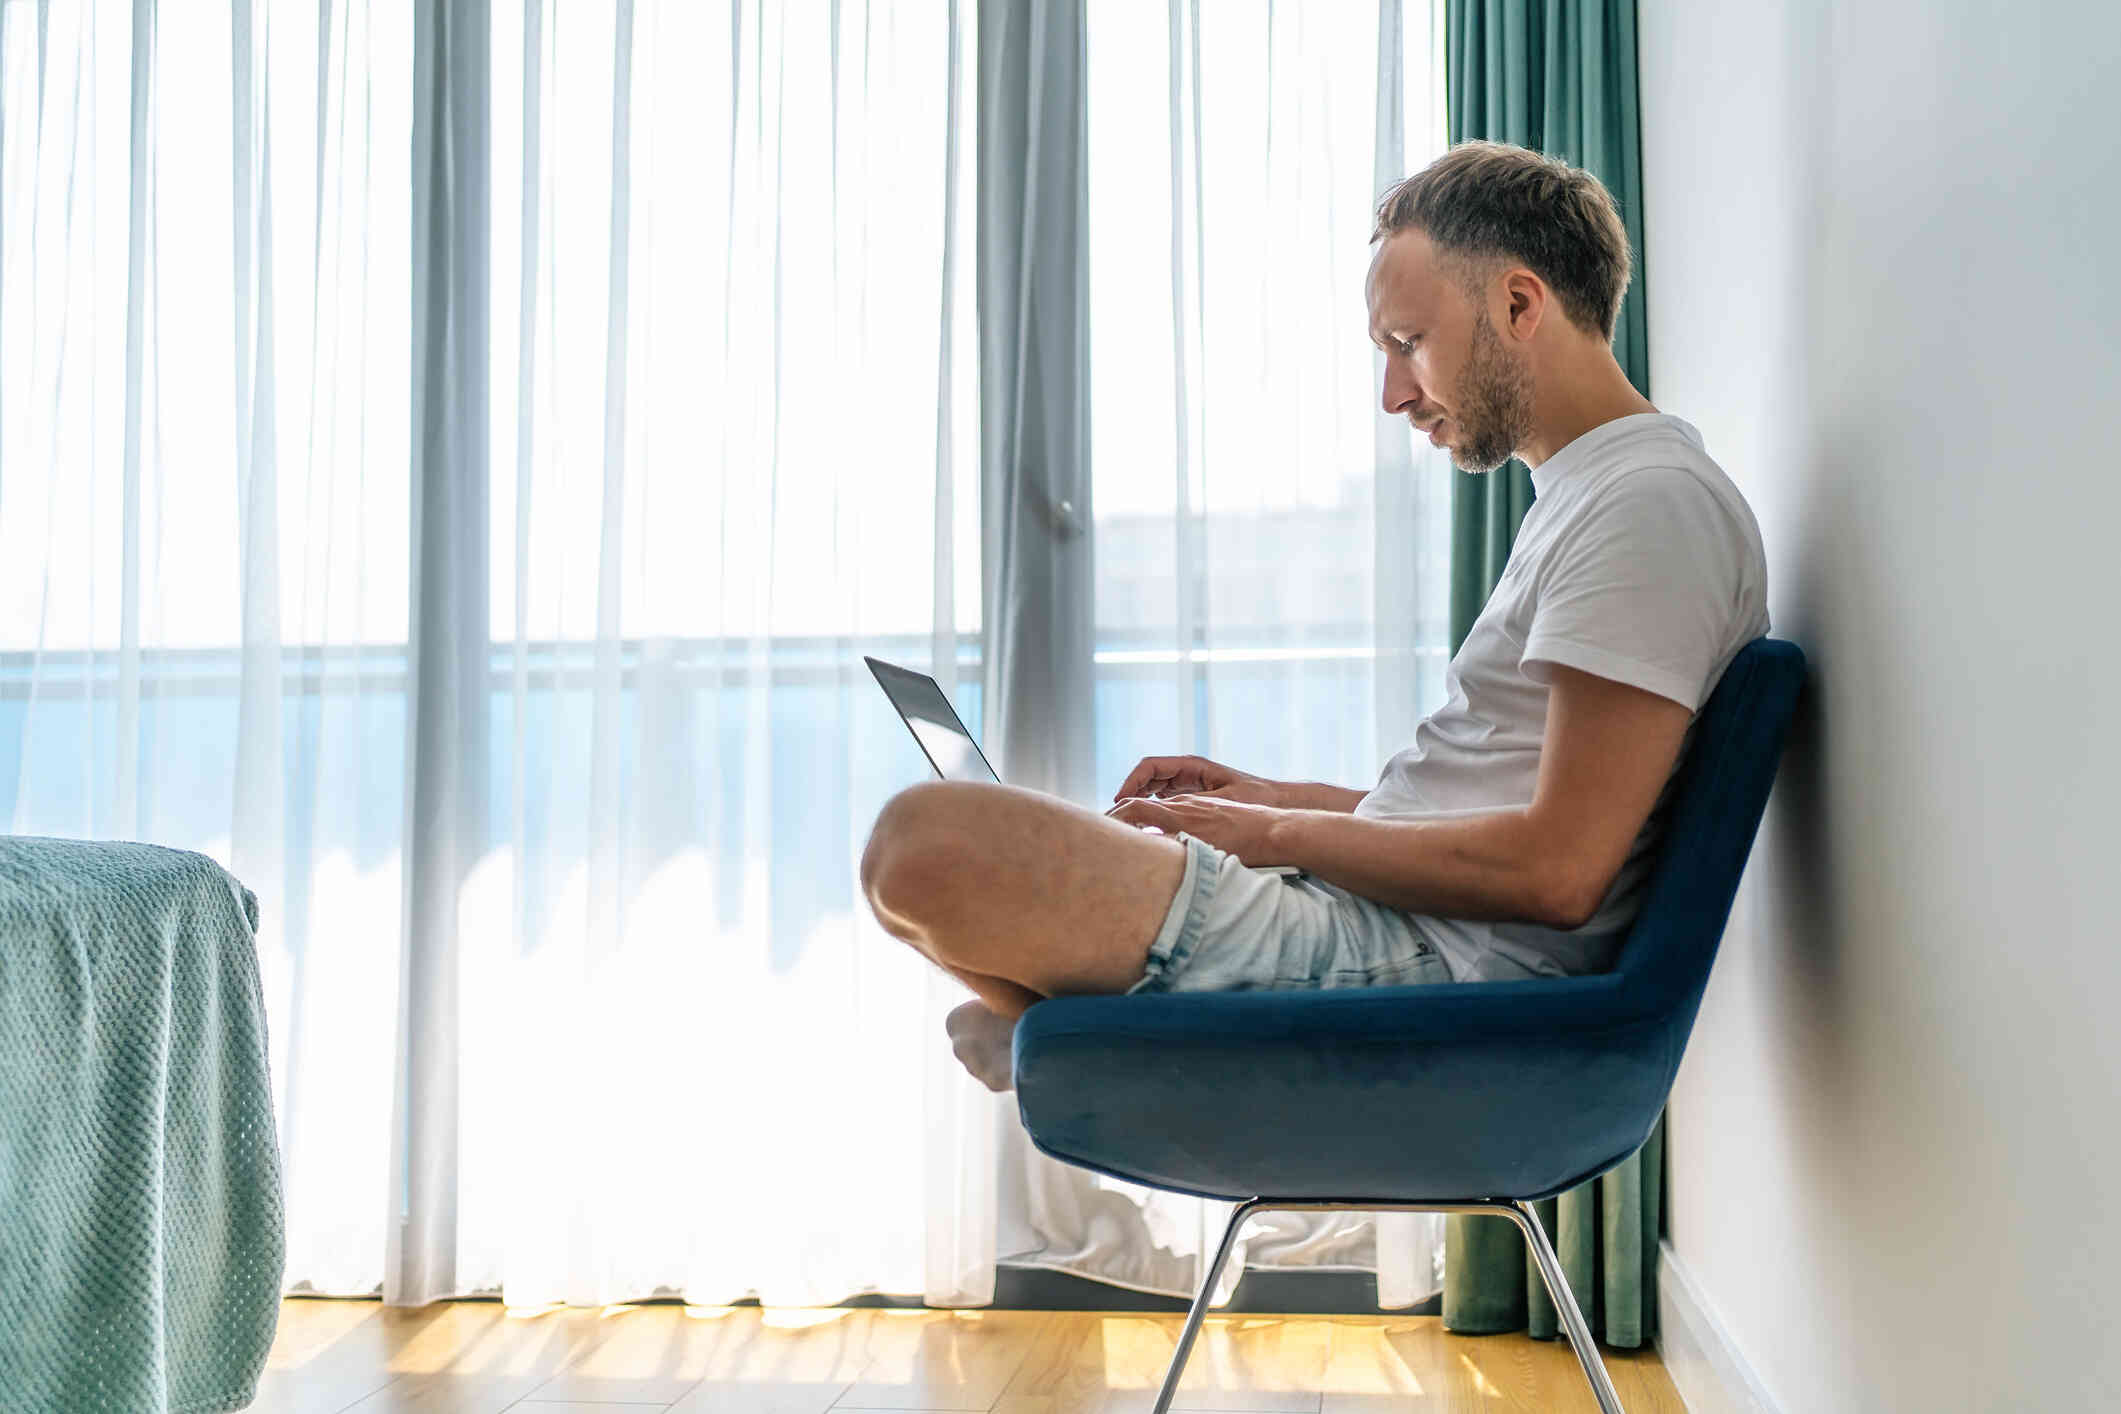 A man sits cross legged in a chair near a window and looks down at the laptop in his lap.